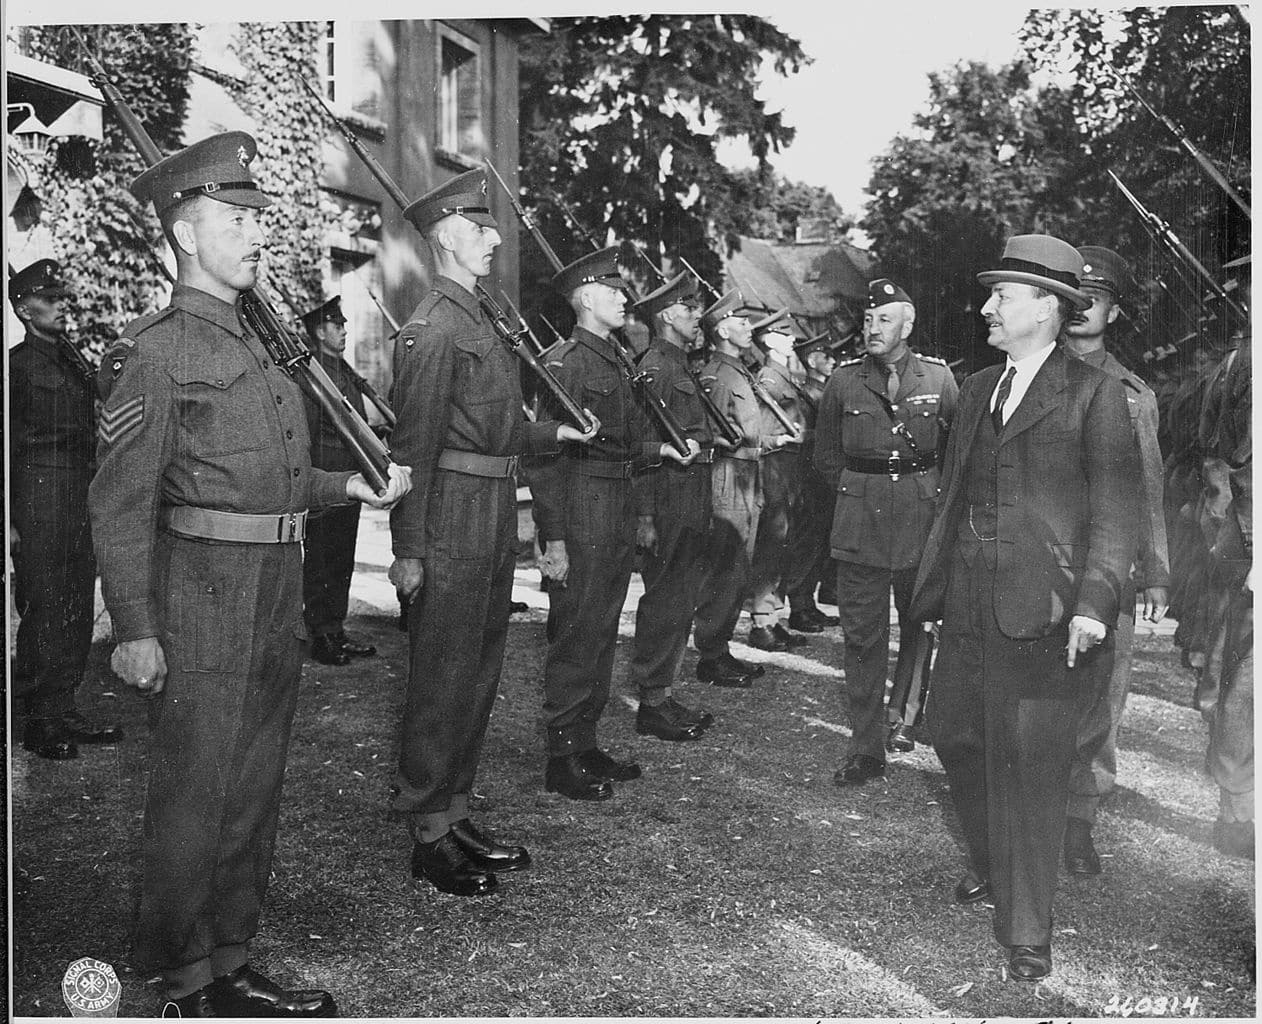 The Potsdam Conference - July 28th 1945 - UK Prime Minister Clement Attlee inspects the honour guards consisting of Scots Guards on the lawn of his villa